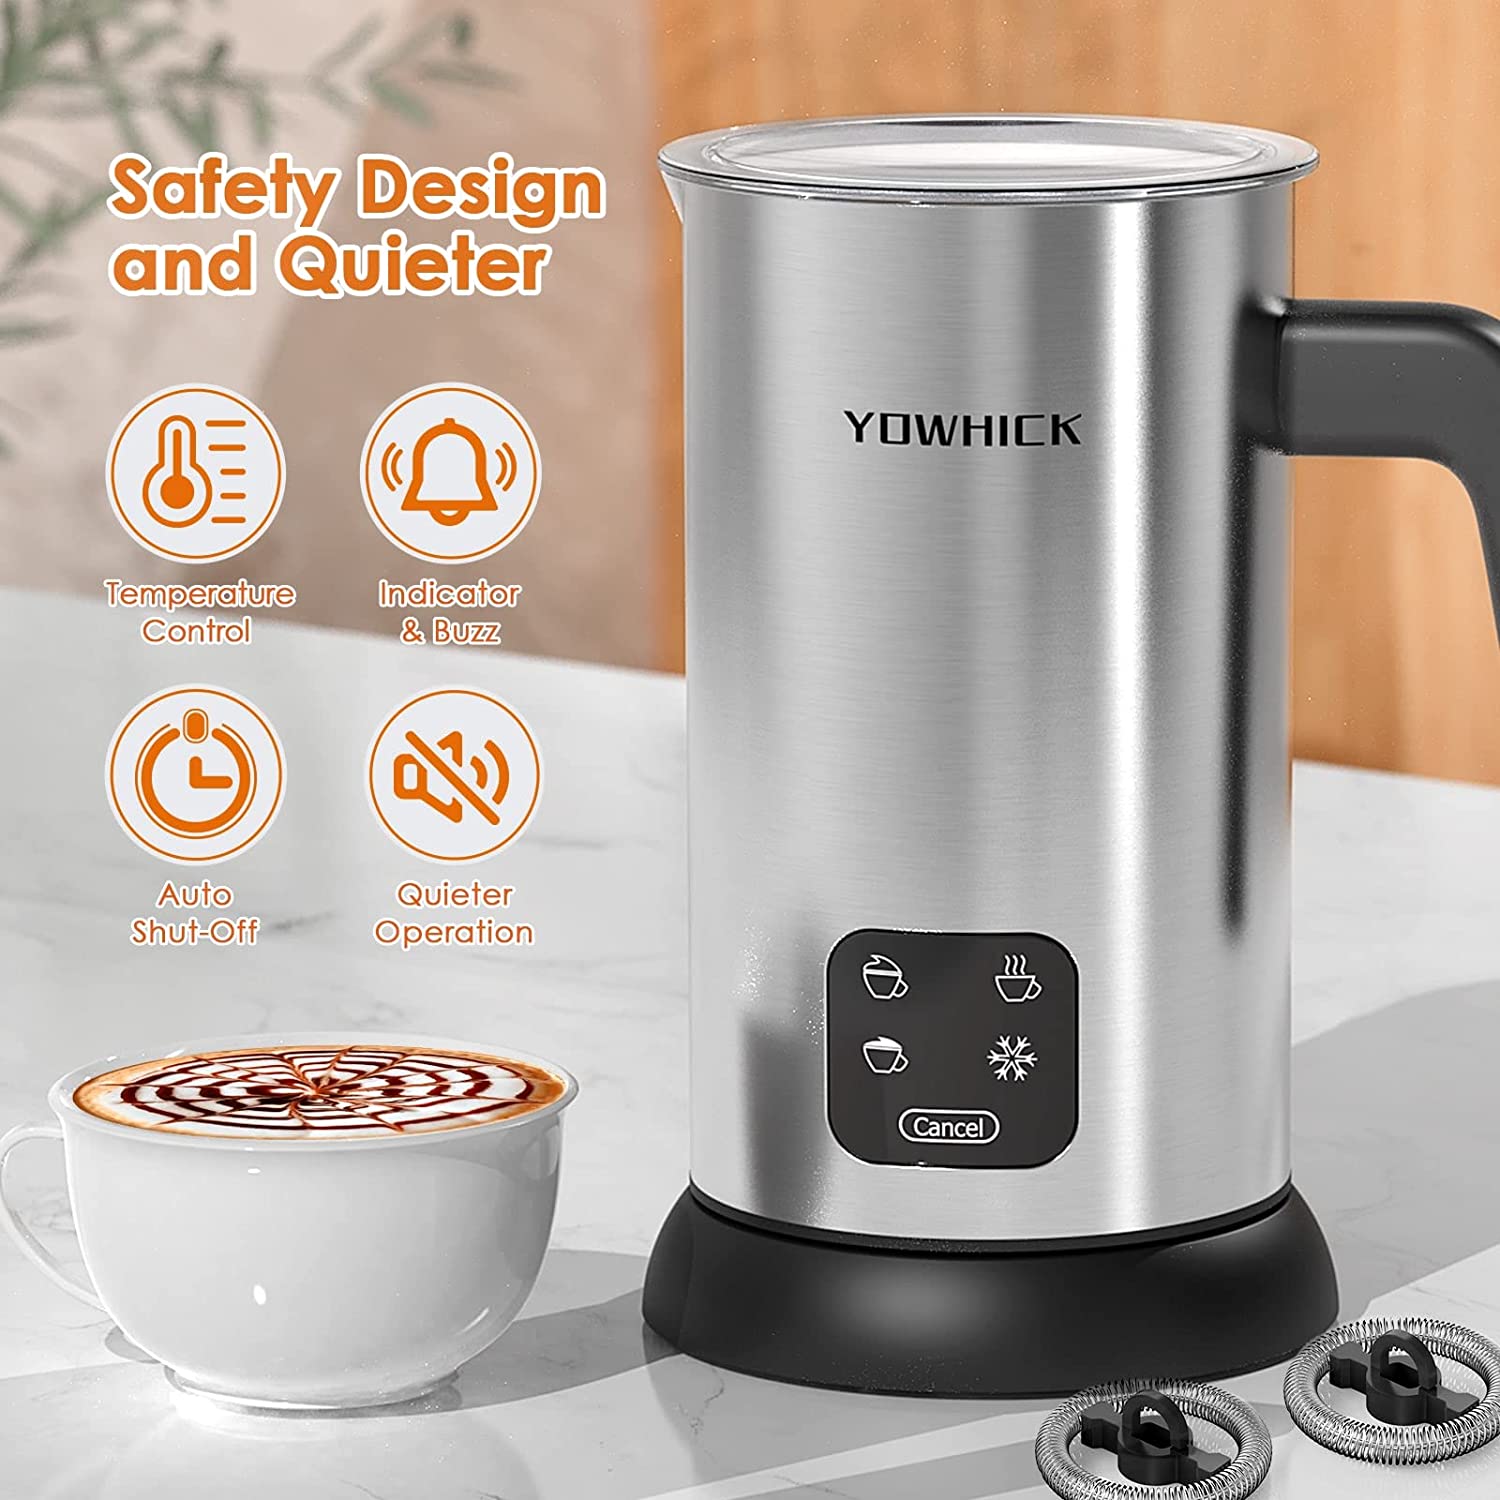 4-in-1 Electric Milk Frother and Warmer